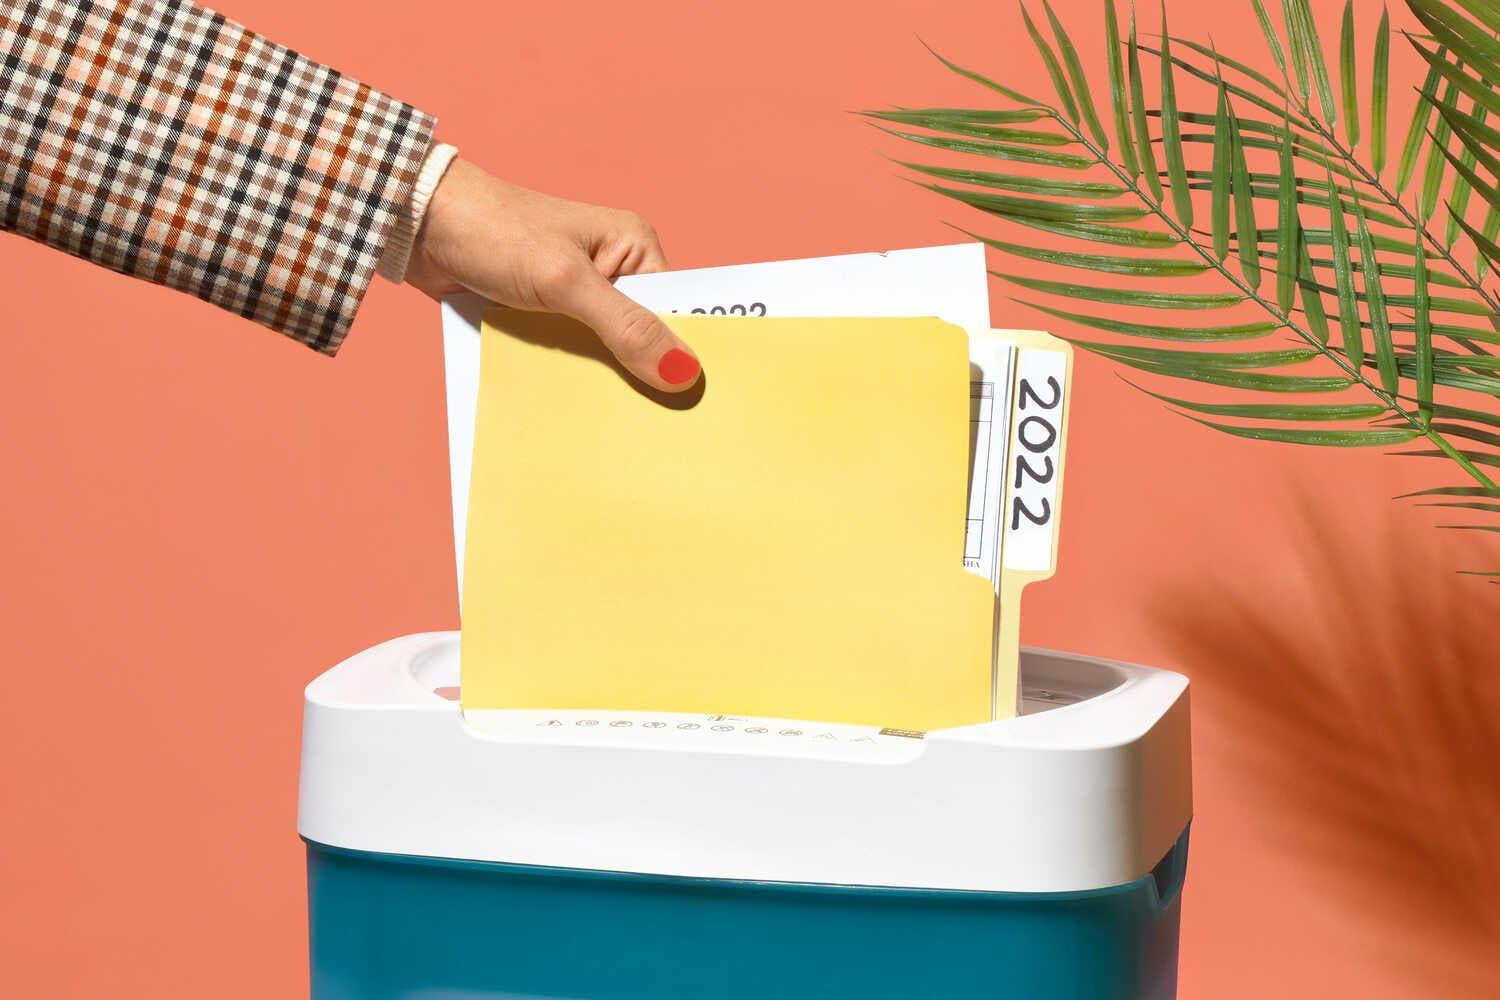 A woman’s hand feeds a folder labeled 2022 into a paper shredder.